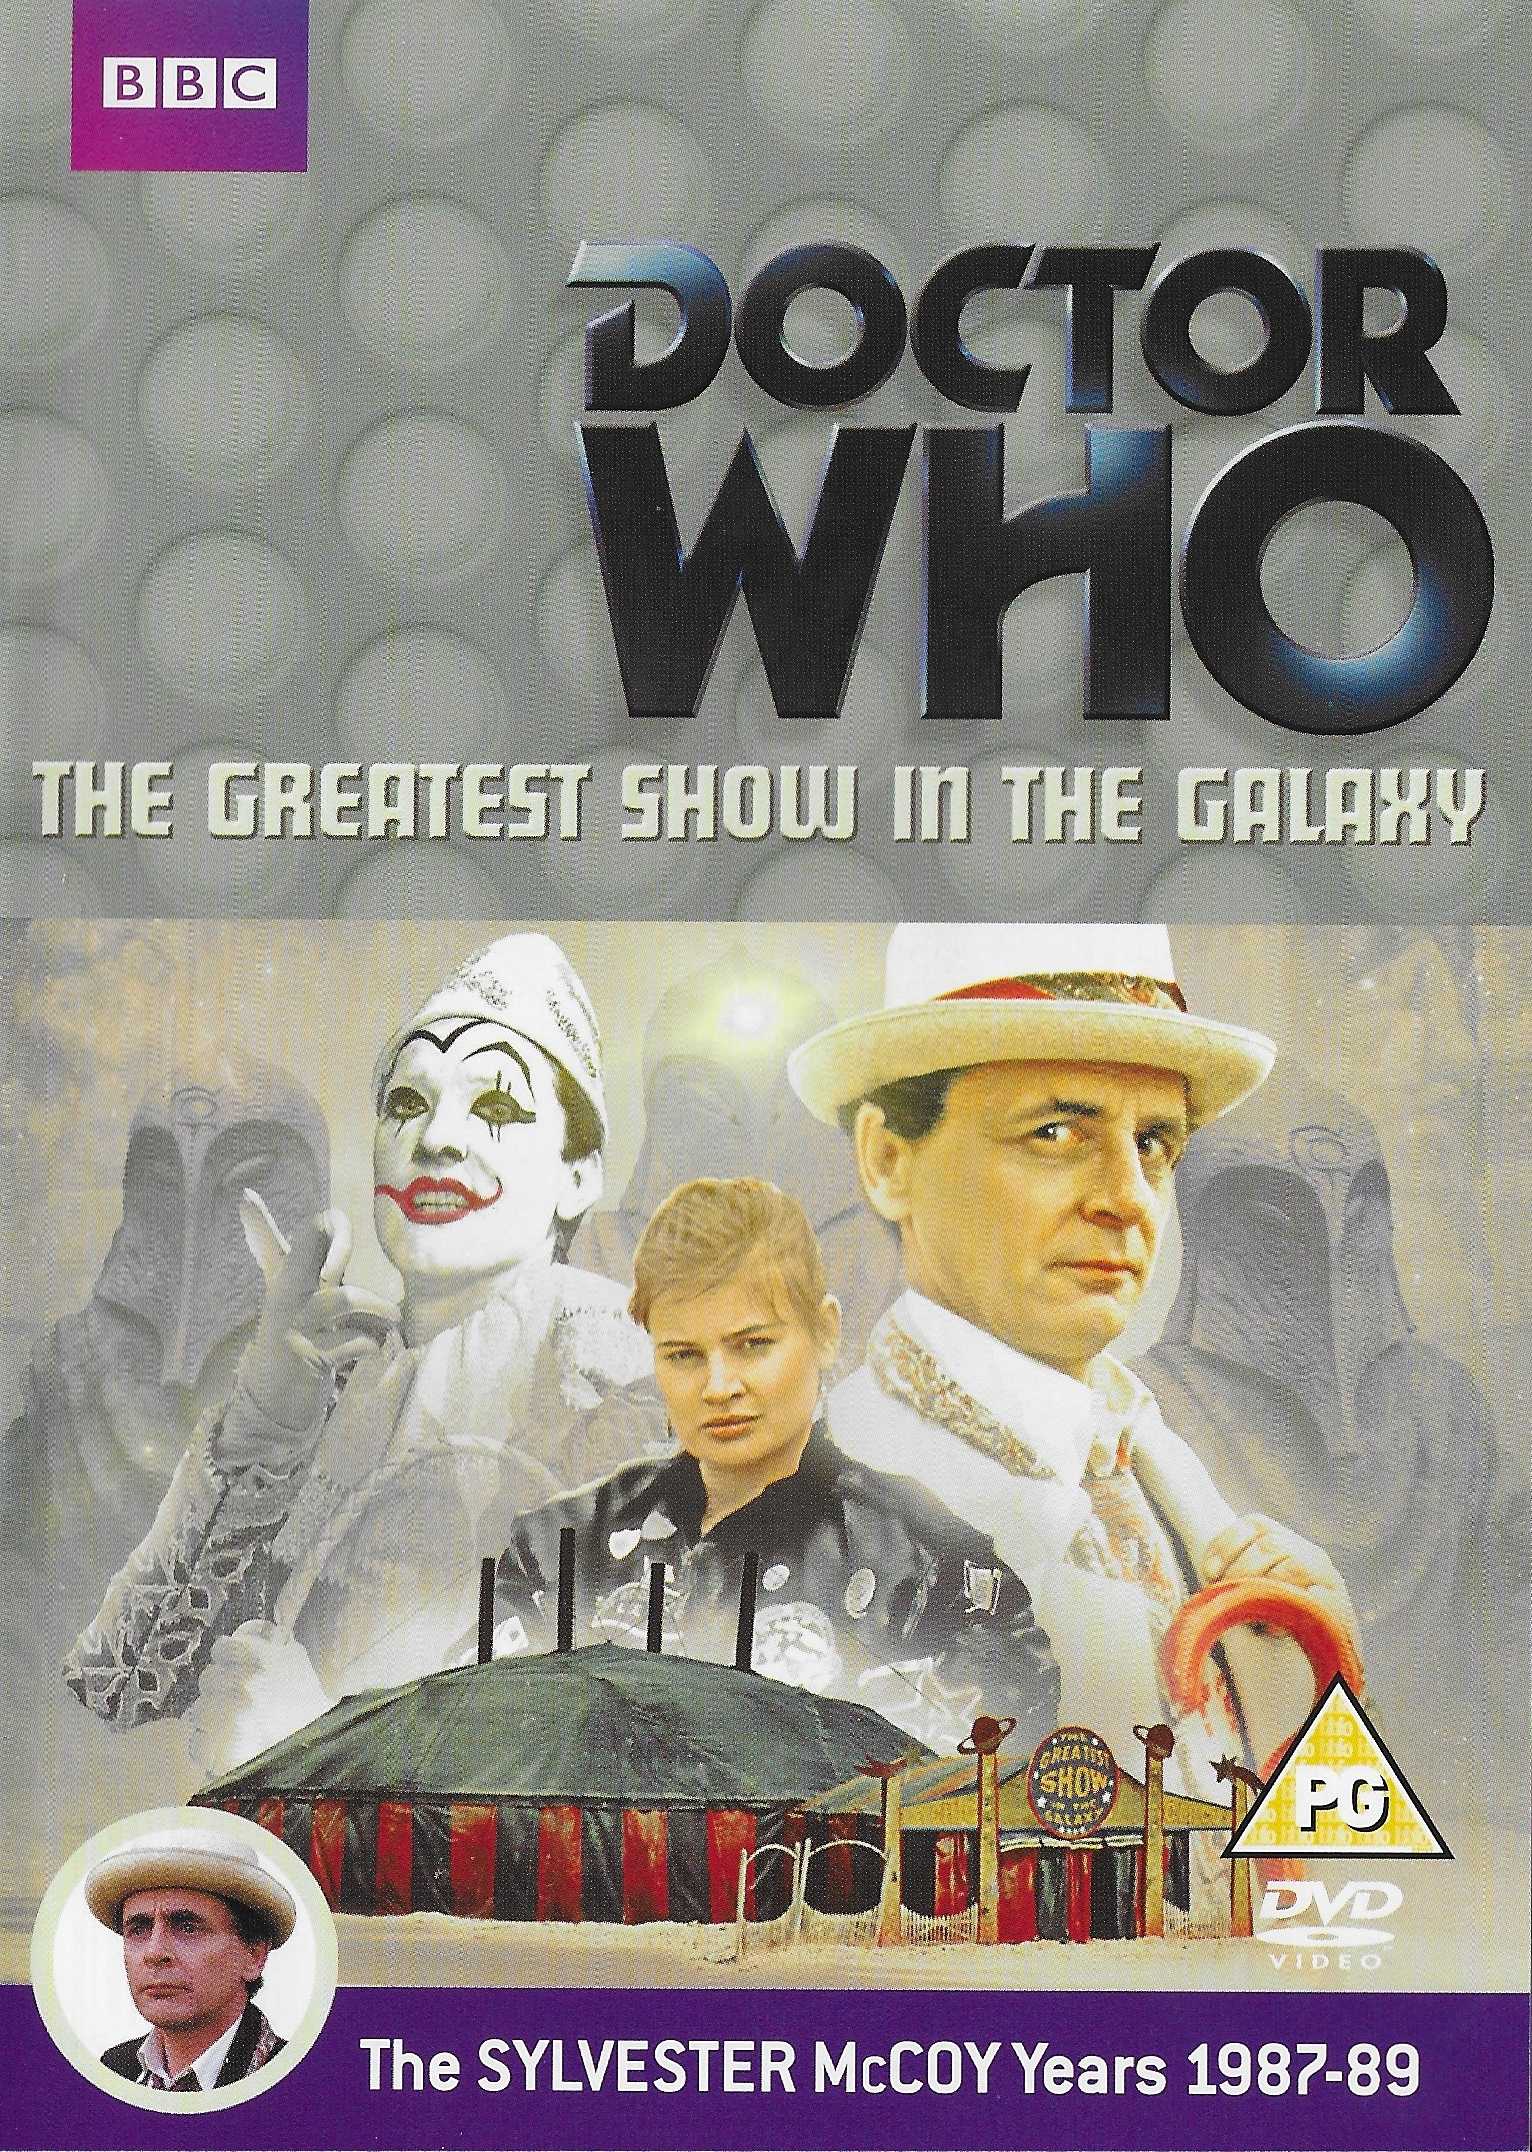 Picture of BBCDVD 3481 Doctor Who - The greatest show in the galaxy by artist Stephen Wyatt from the BBC dvds - Records and Tapes library